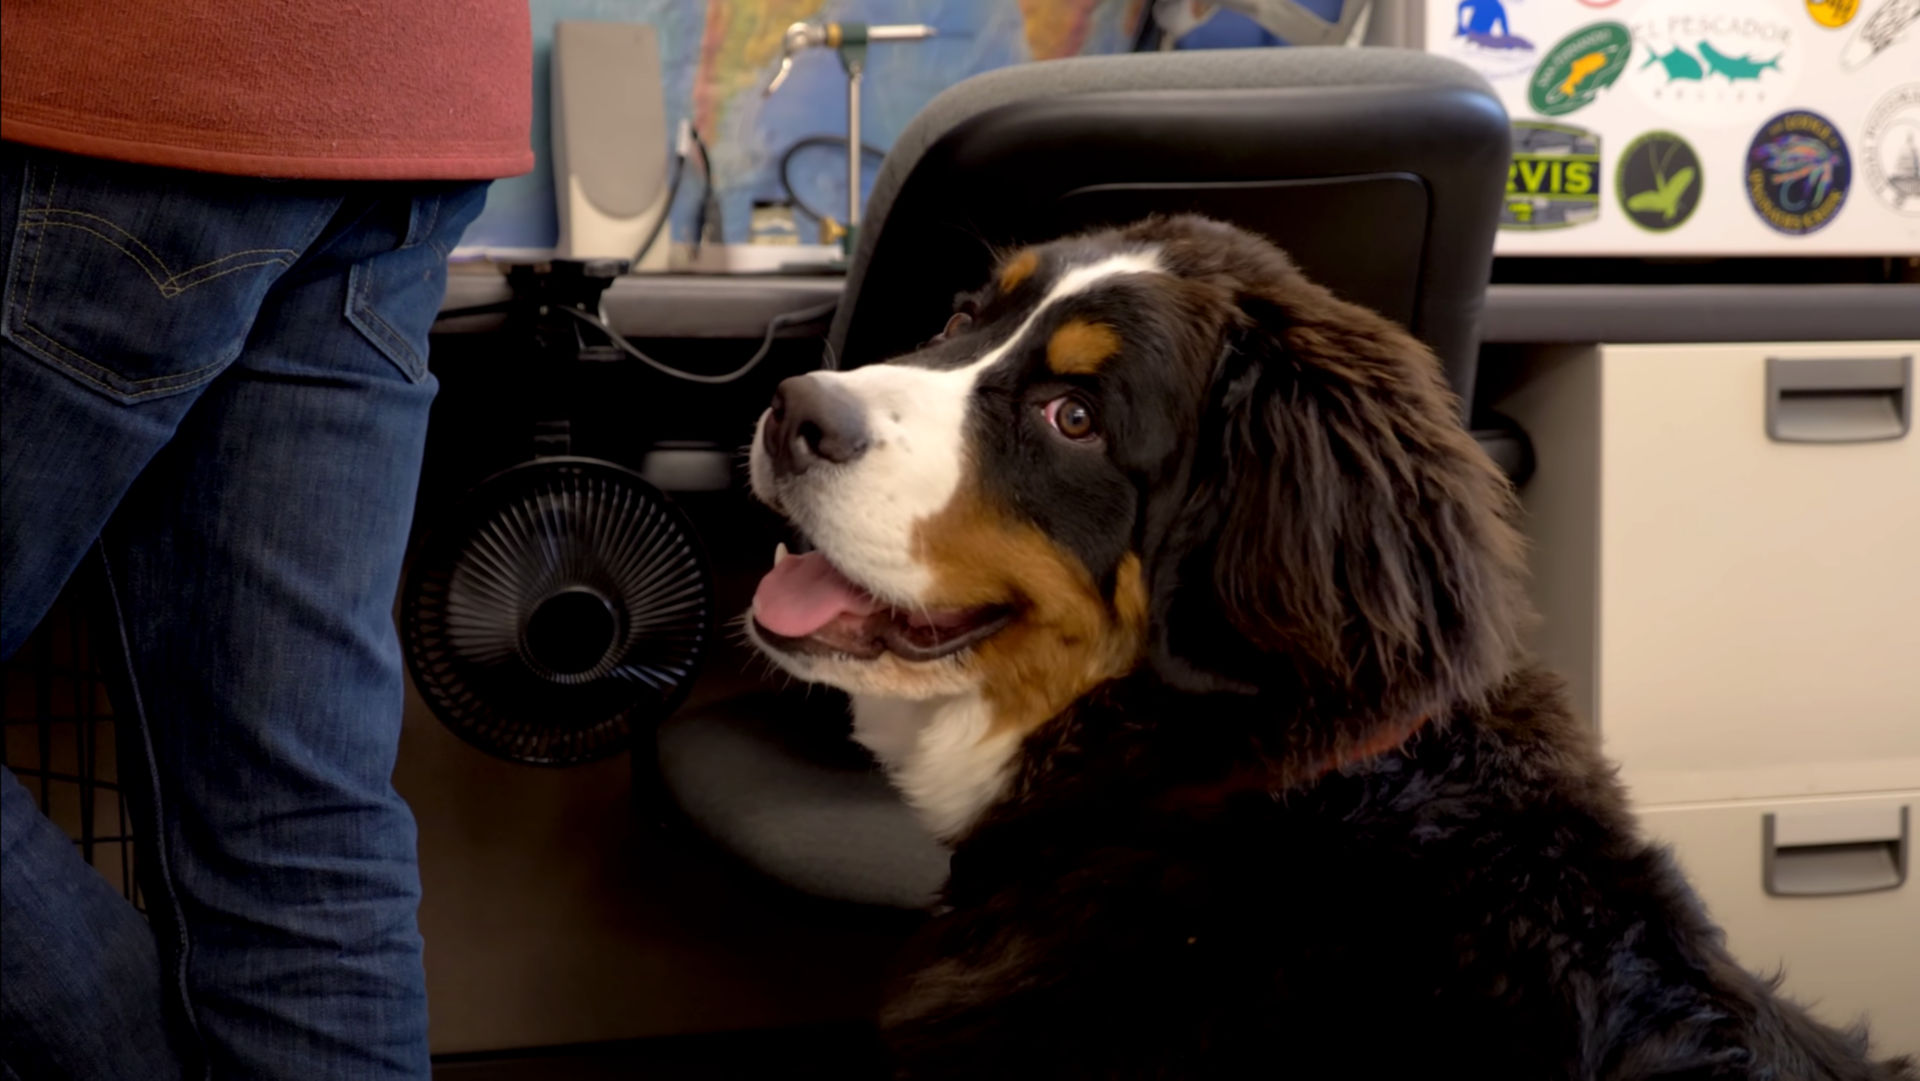 Bernese Mountain Dog, Moose, smiles for the camera in the Orvis office